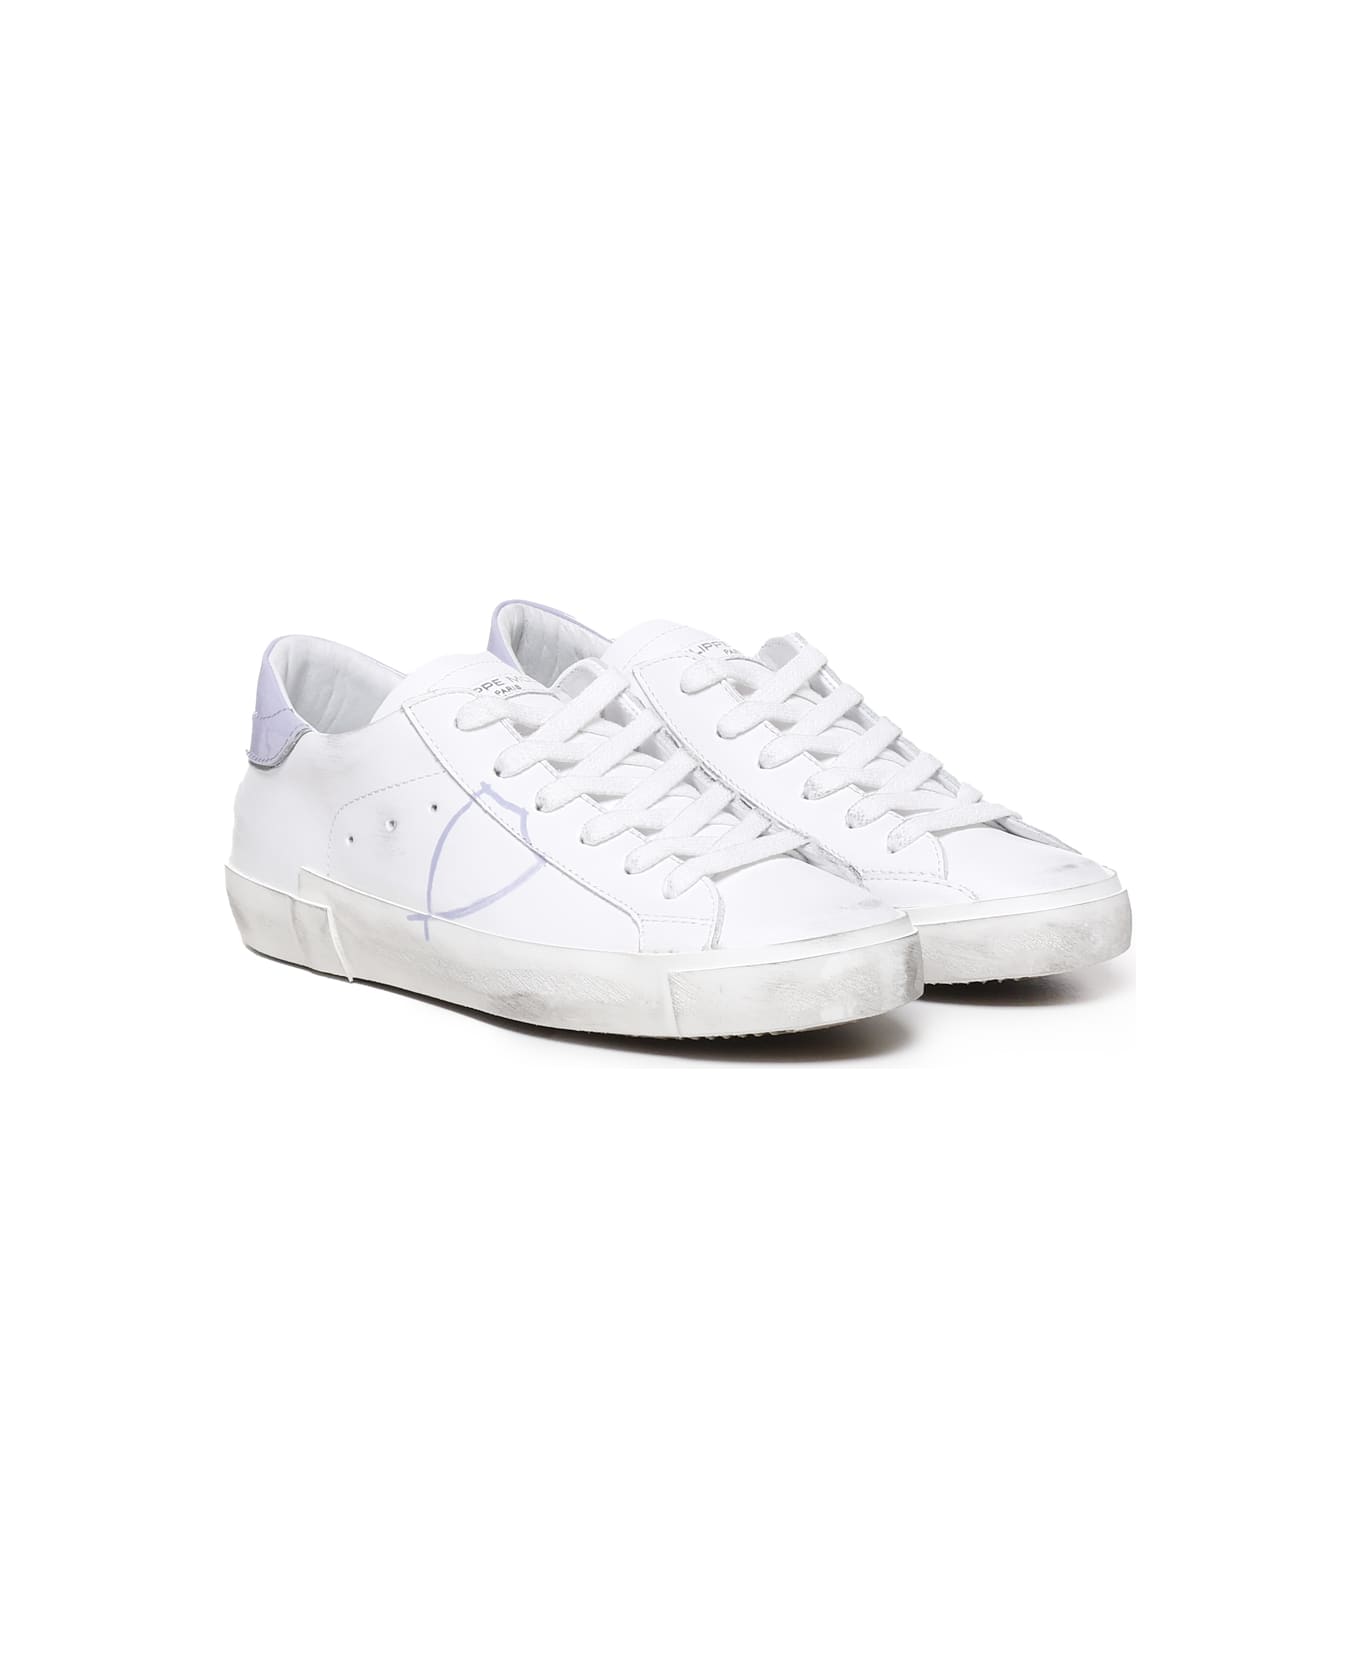 Philippe Model Prsx Casual Leather Sneaker - White, lillac スニーカー